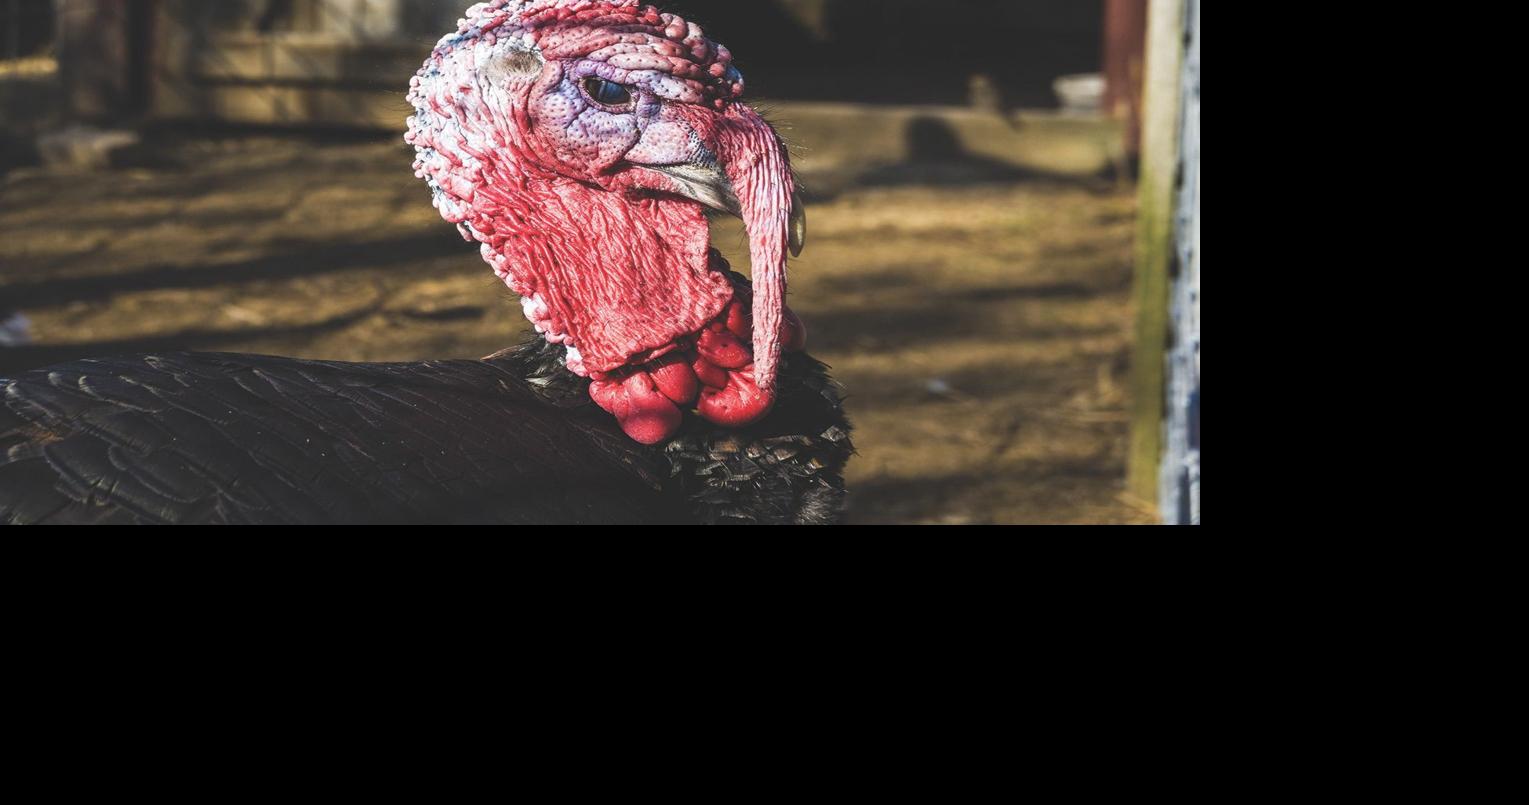 Fall Turkey Season Opens Today in Most States New Sile Agva